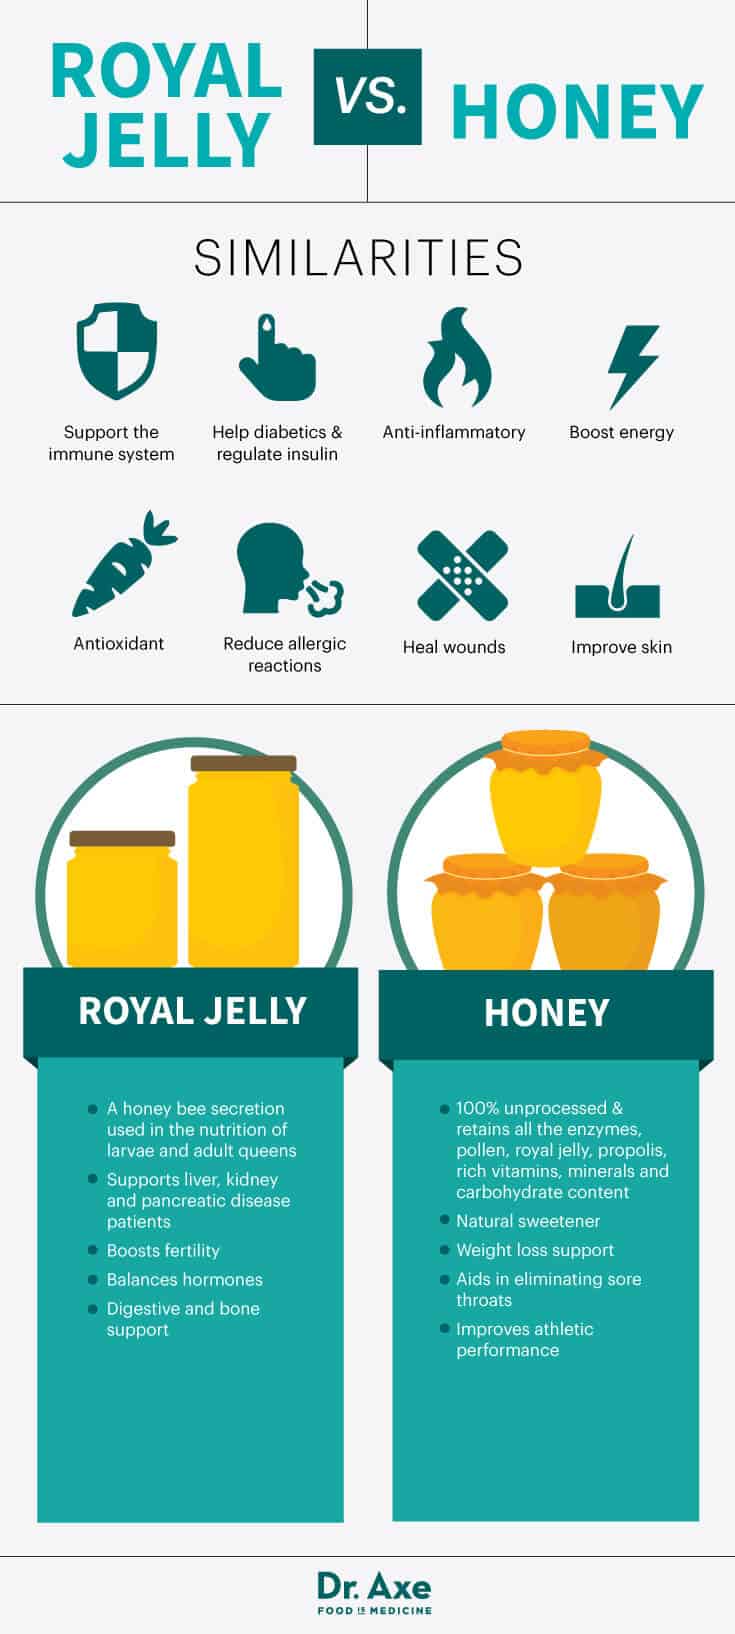 Royal Jelly Health Benefits, Uses and Supplement Dosage - Dr. Axe